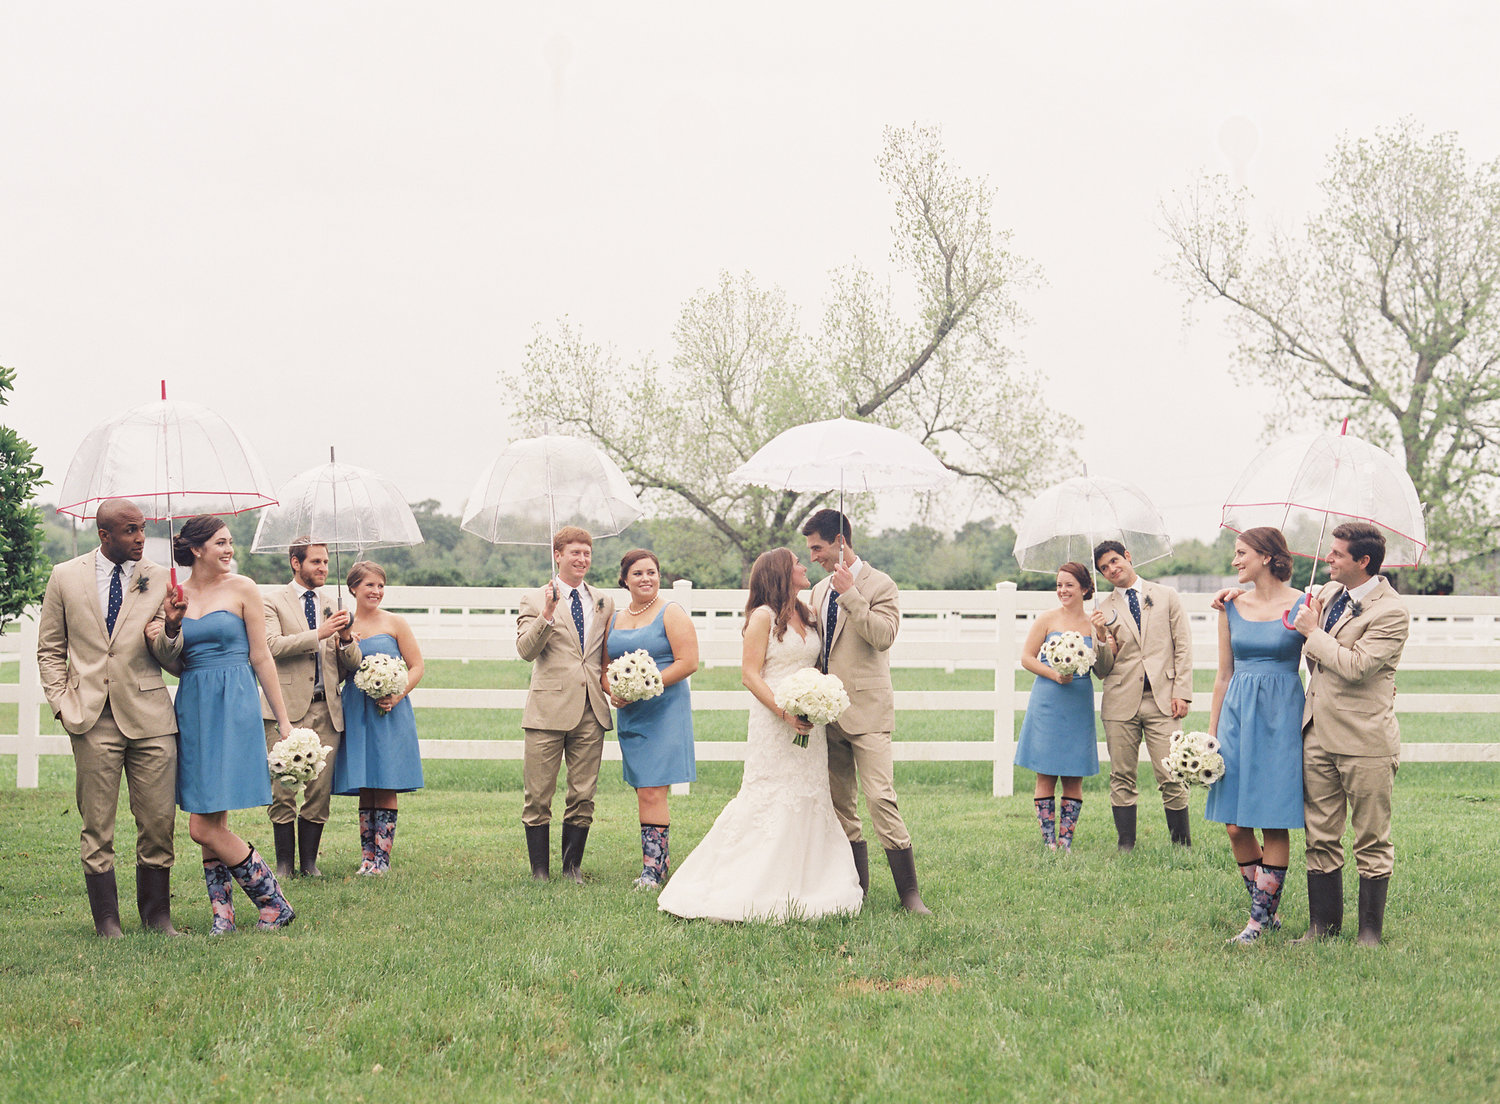 Why you should never let a little rain ruin your wedding day